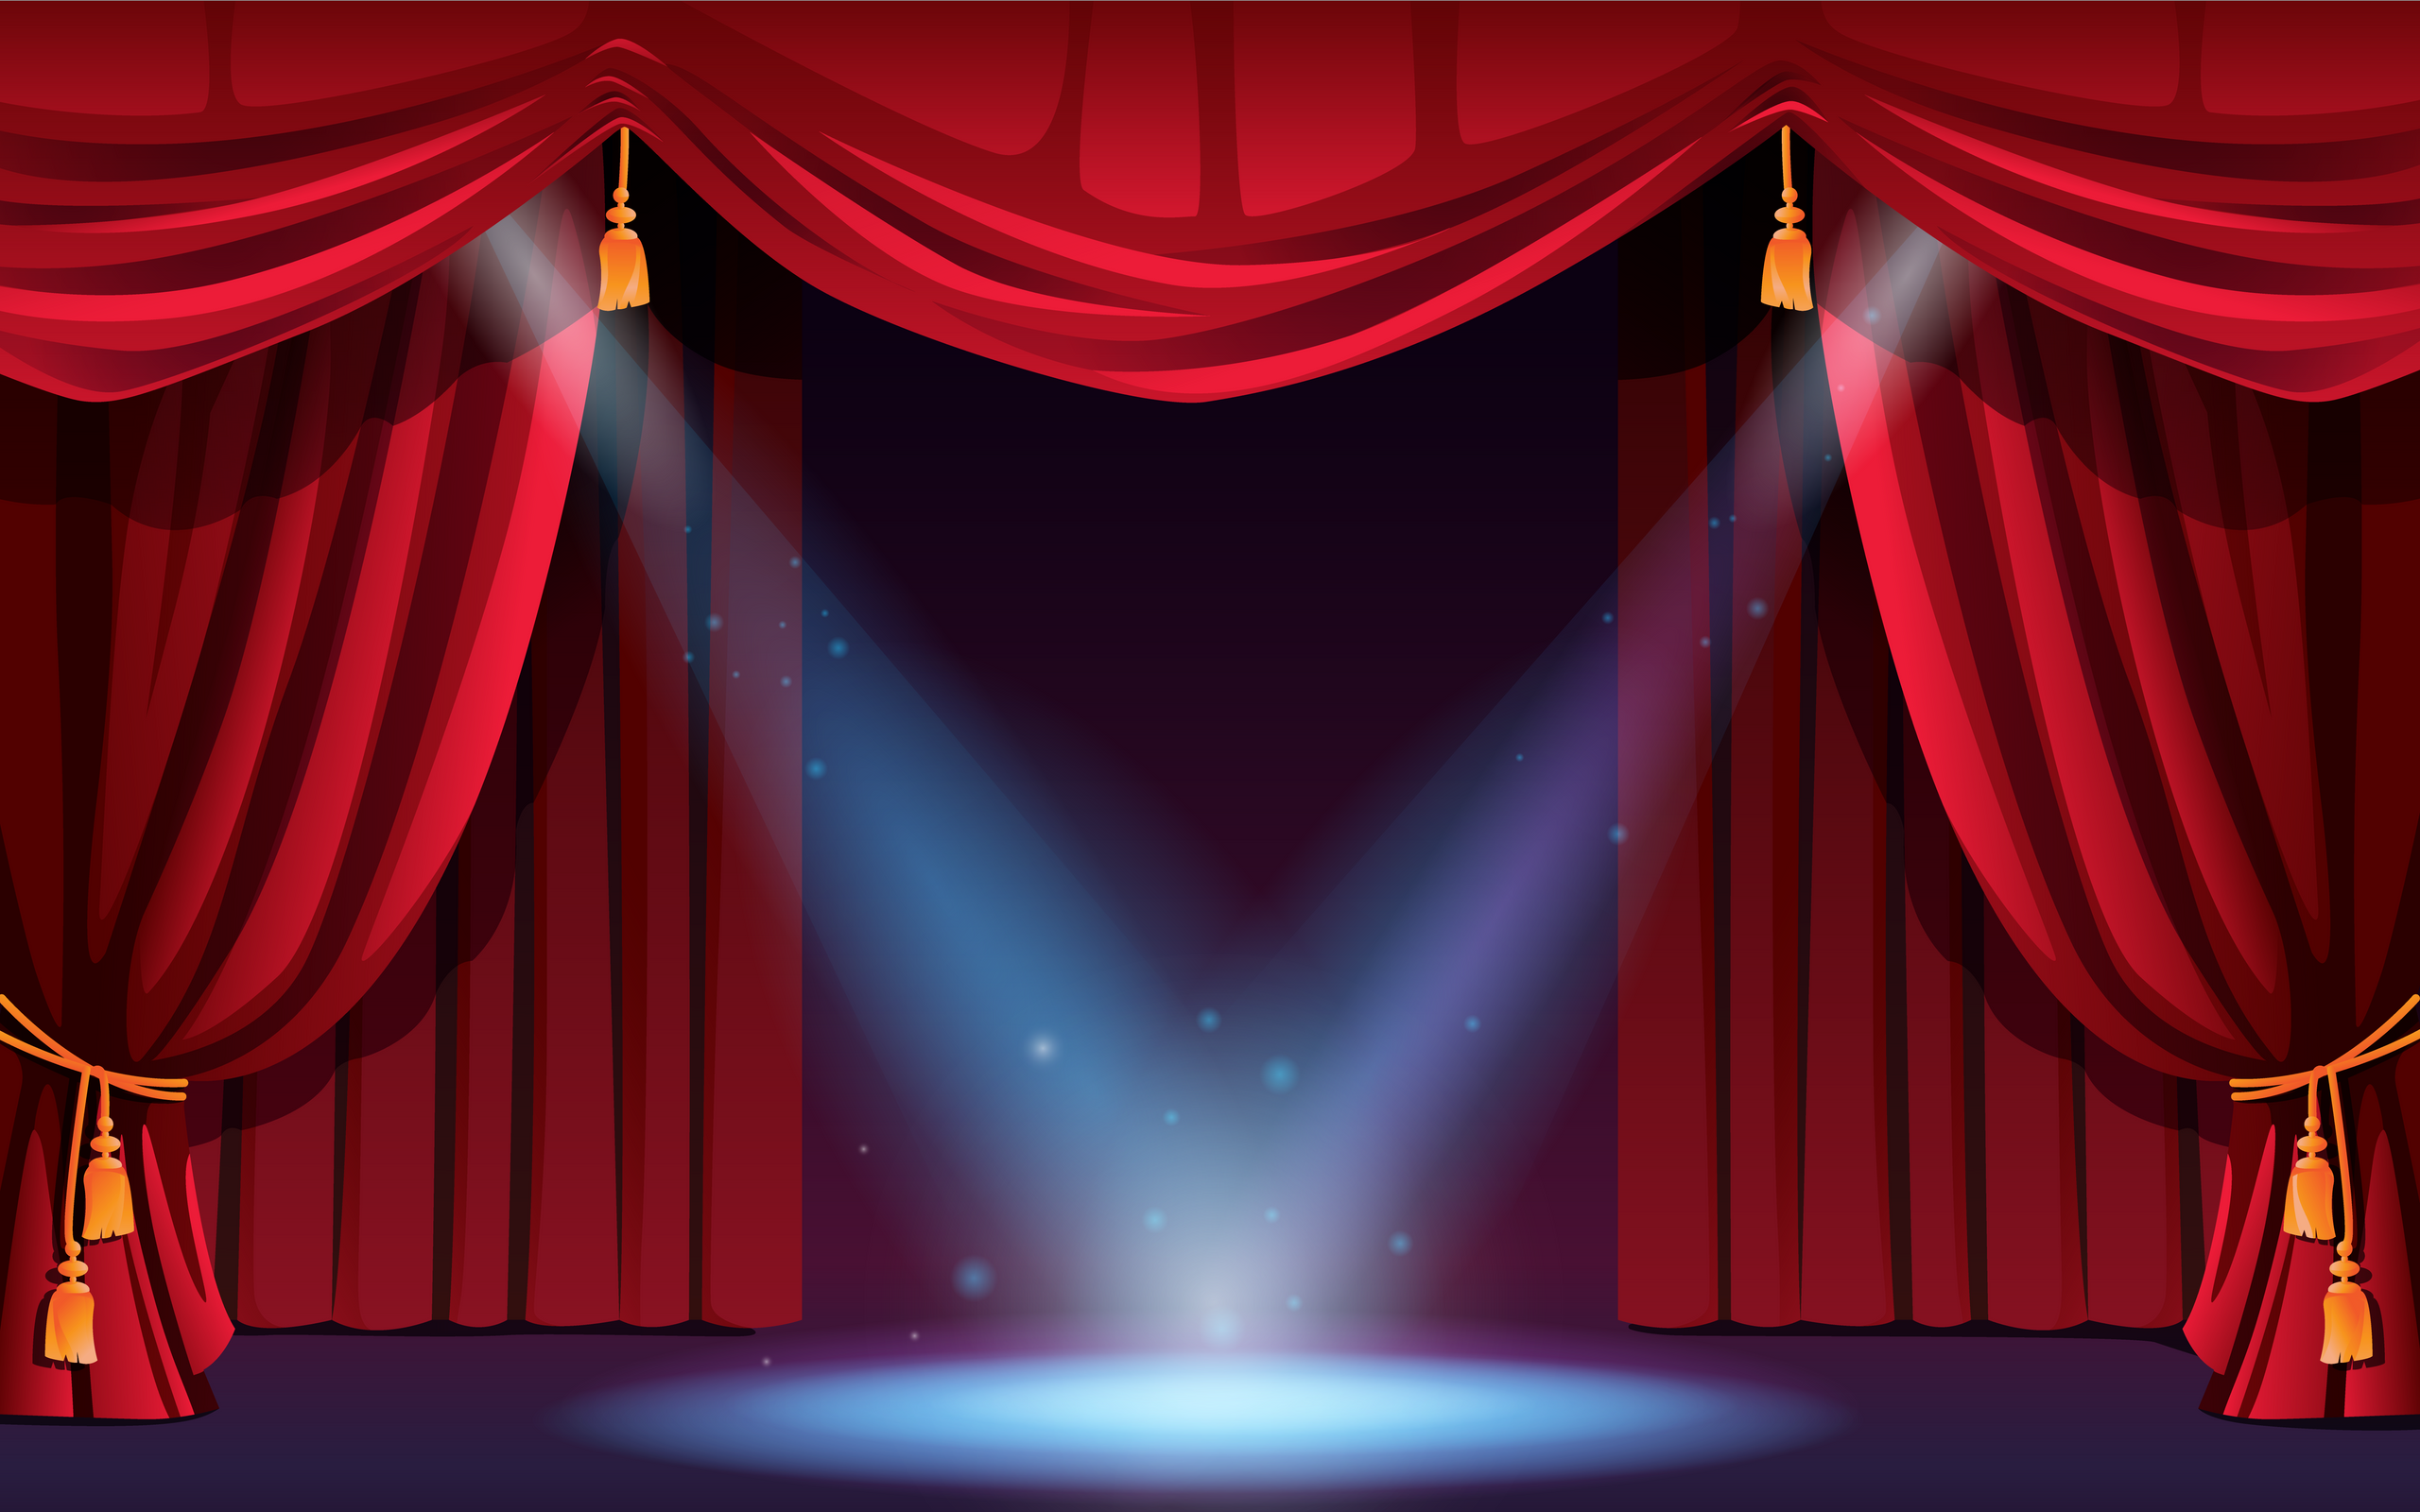 Theater Stage with Red Curtains and Spotlights